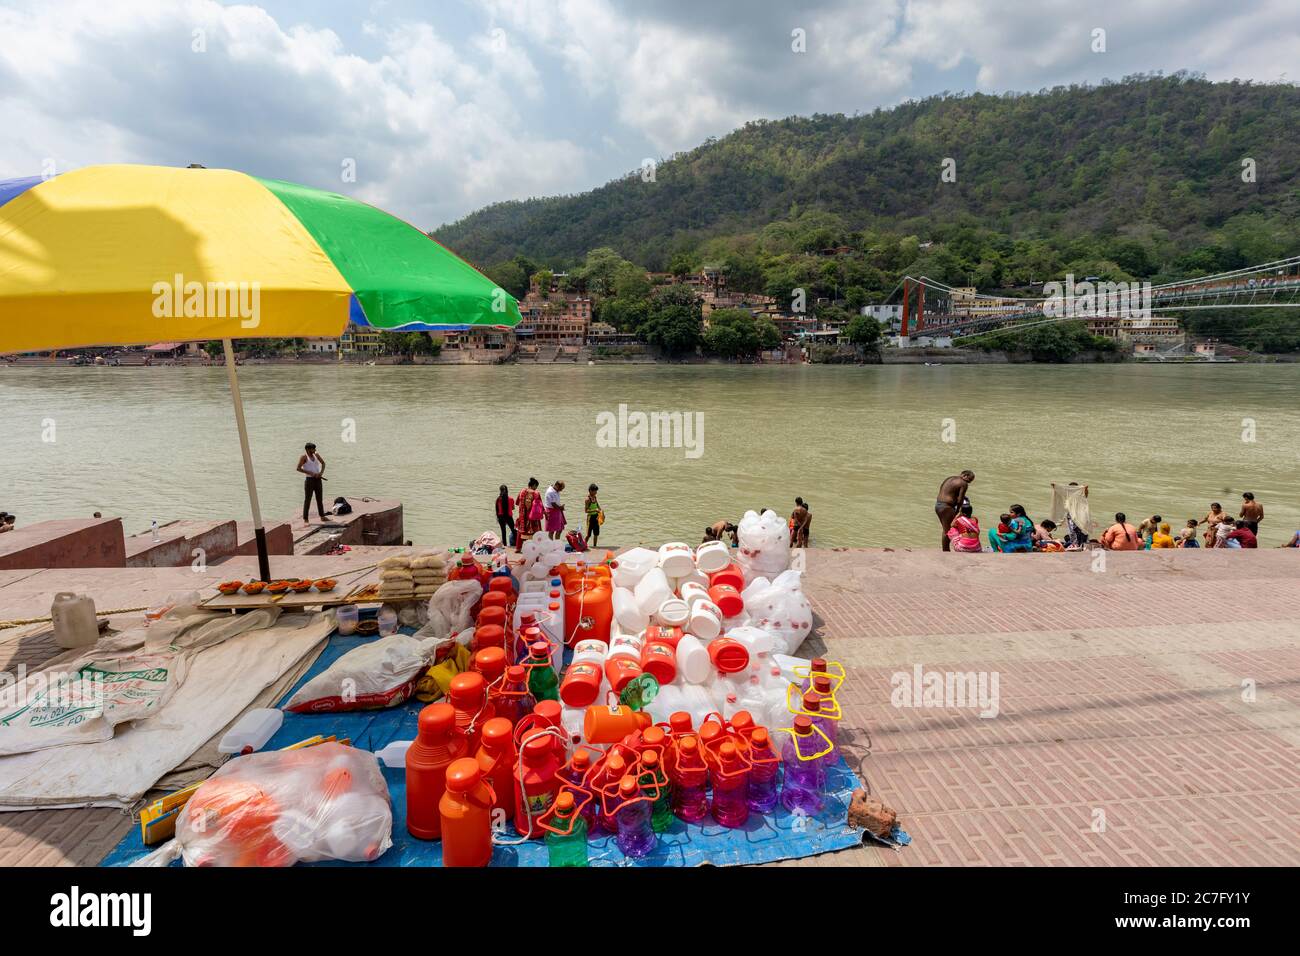 Plastic jugs on sale for collecting the water of River Ganges in the holy town of Rishikesh in northern India Stock Photo